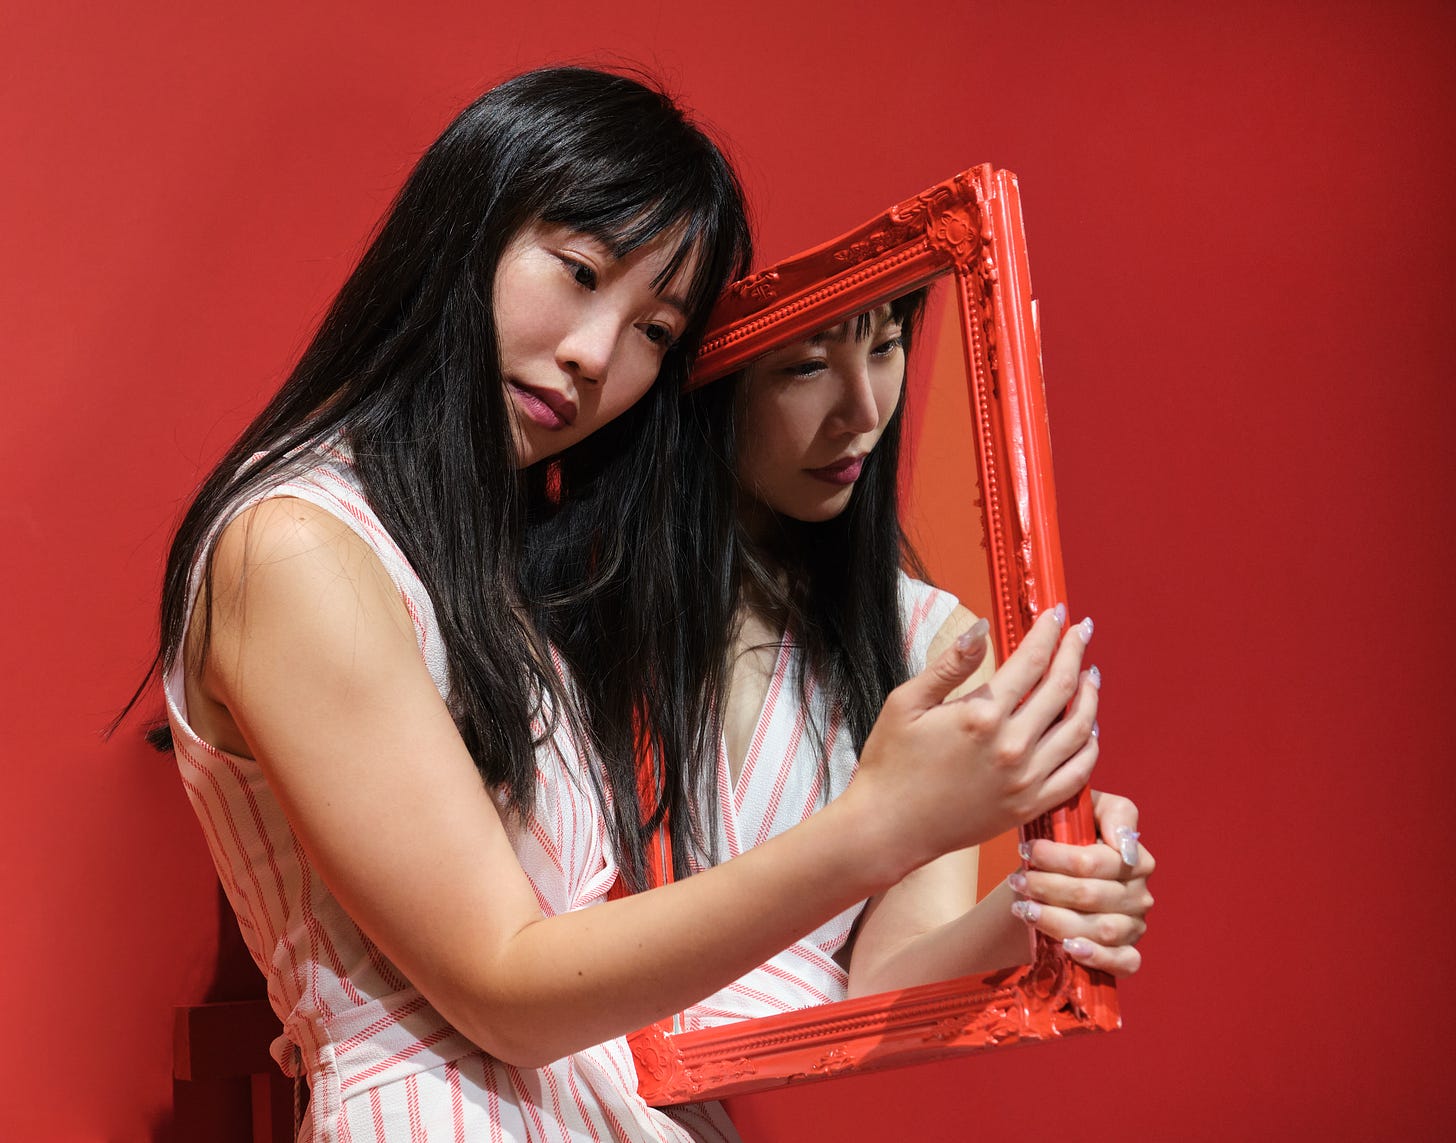 Young asian woman pose with a red framed mirror over a red background. Her reflection emerges from one side to help hold the mirror.